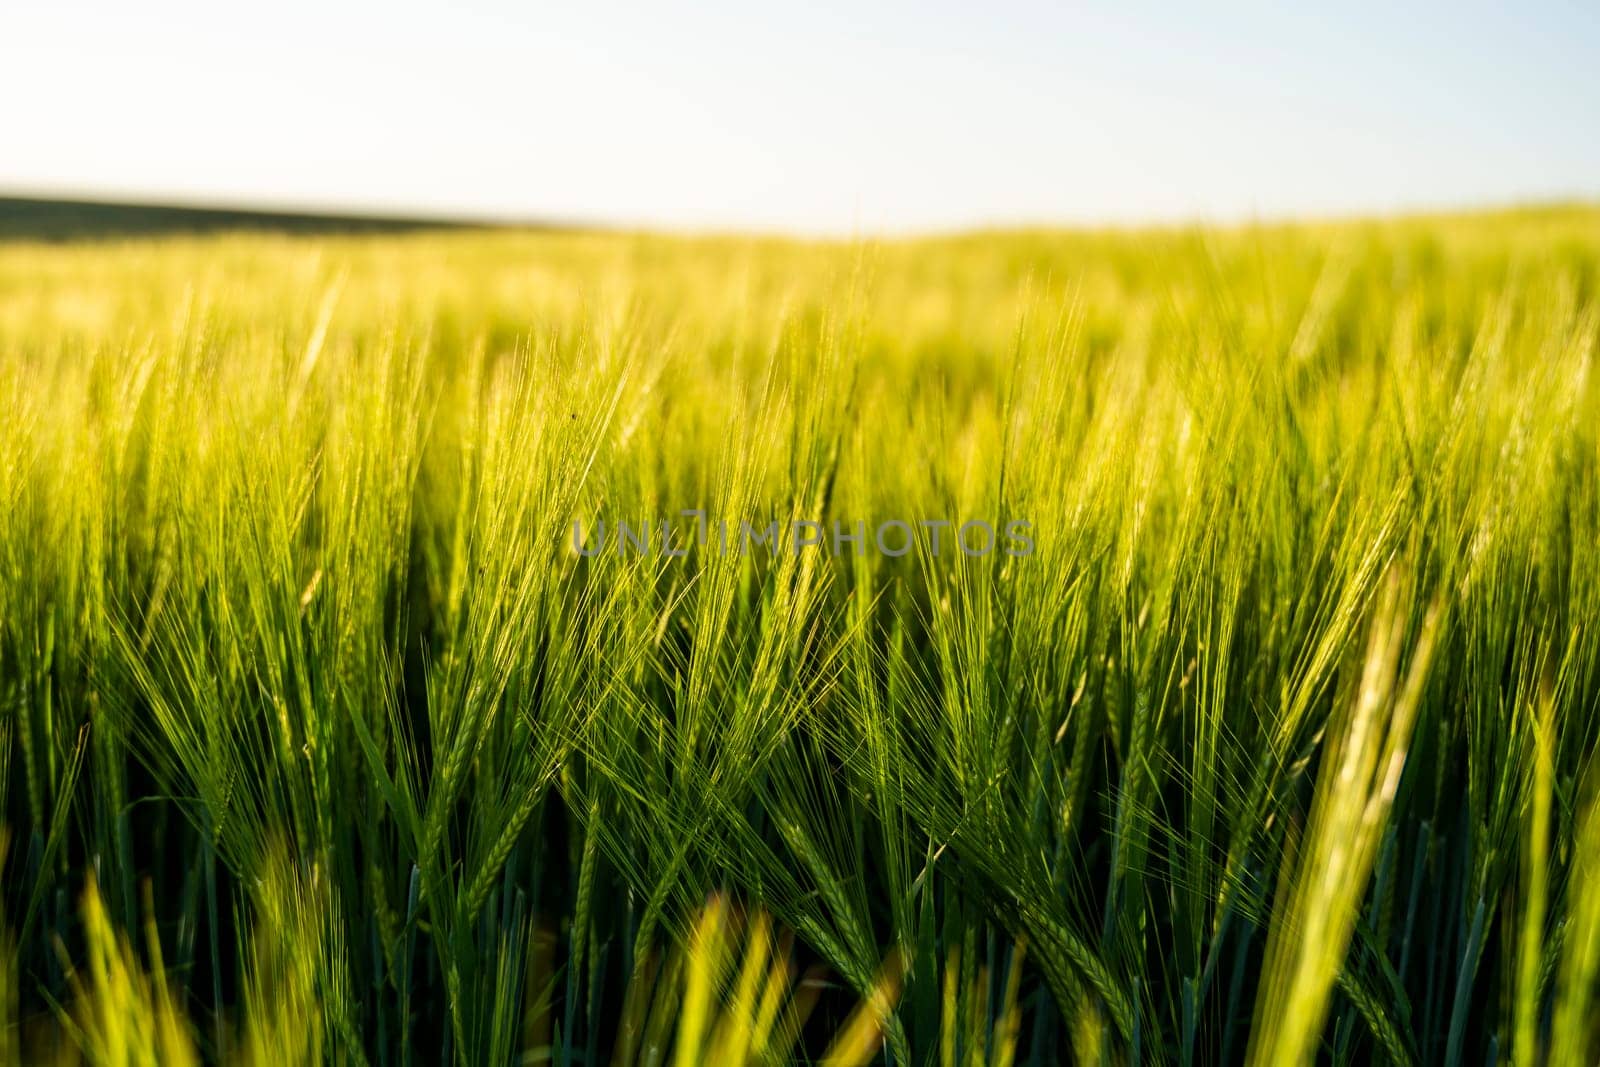 Young barley ears illuminated by sunlight. Concept of a good harvest in an agricultural field